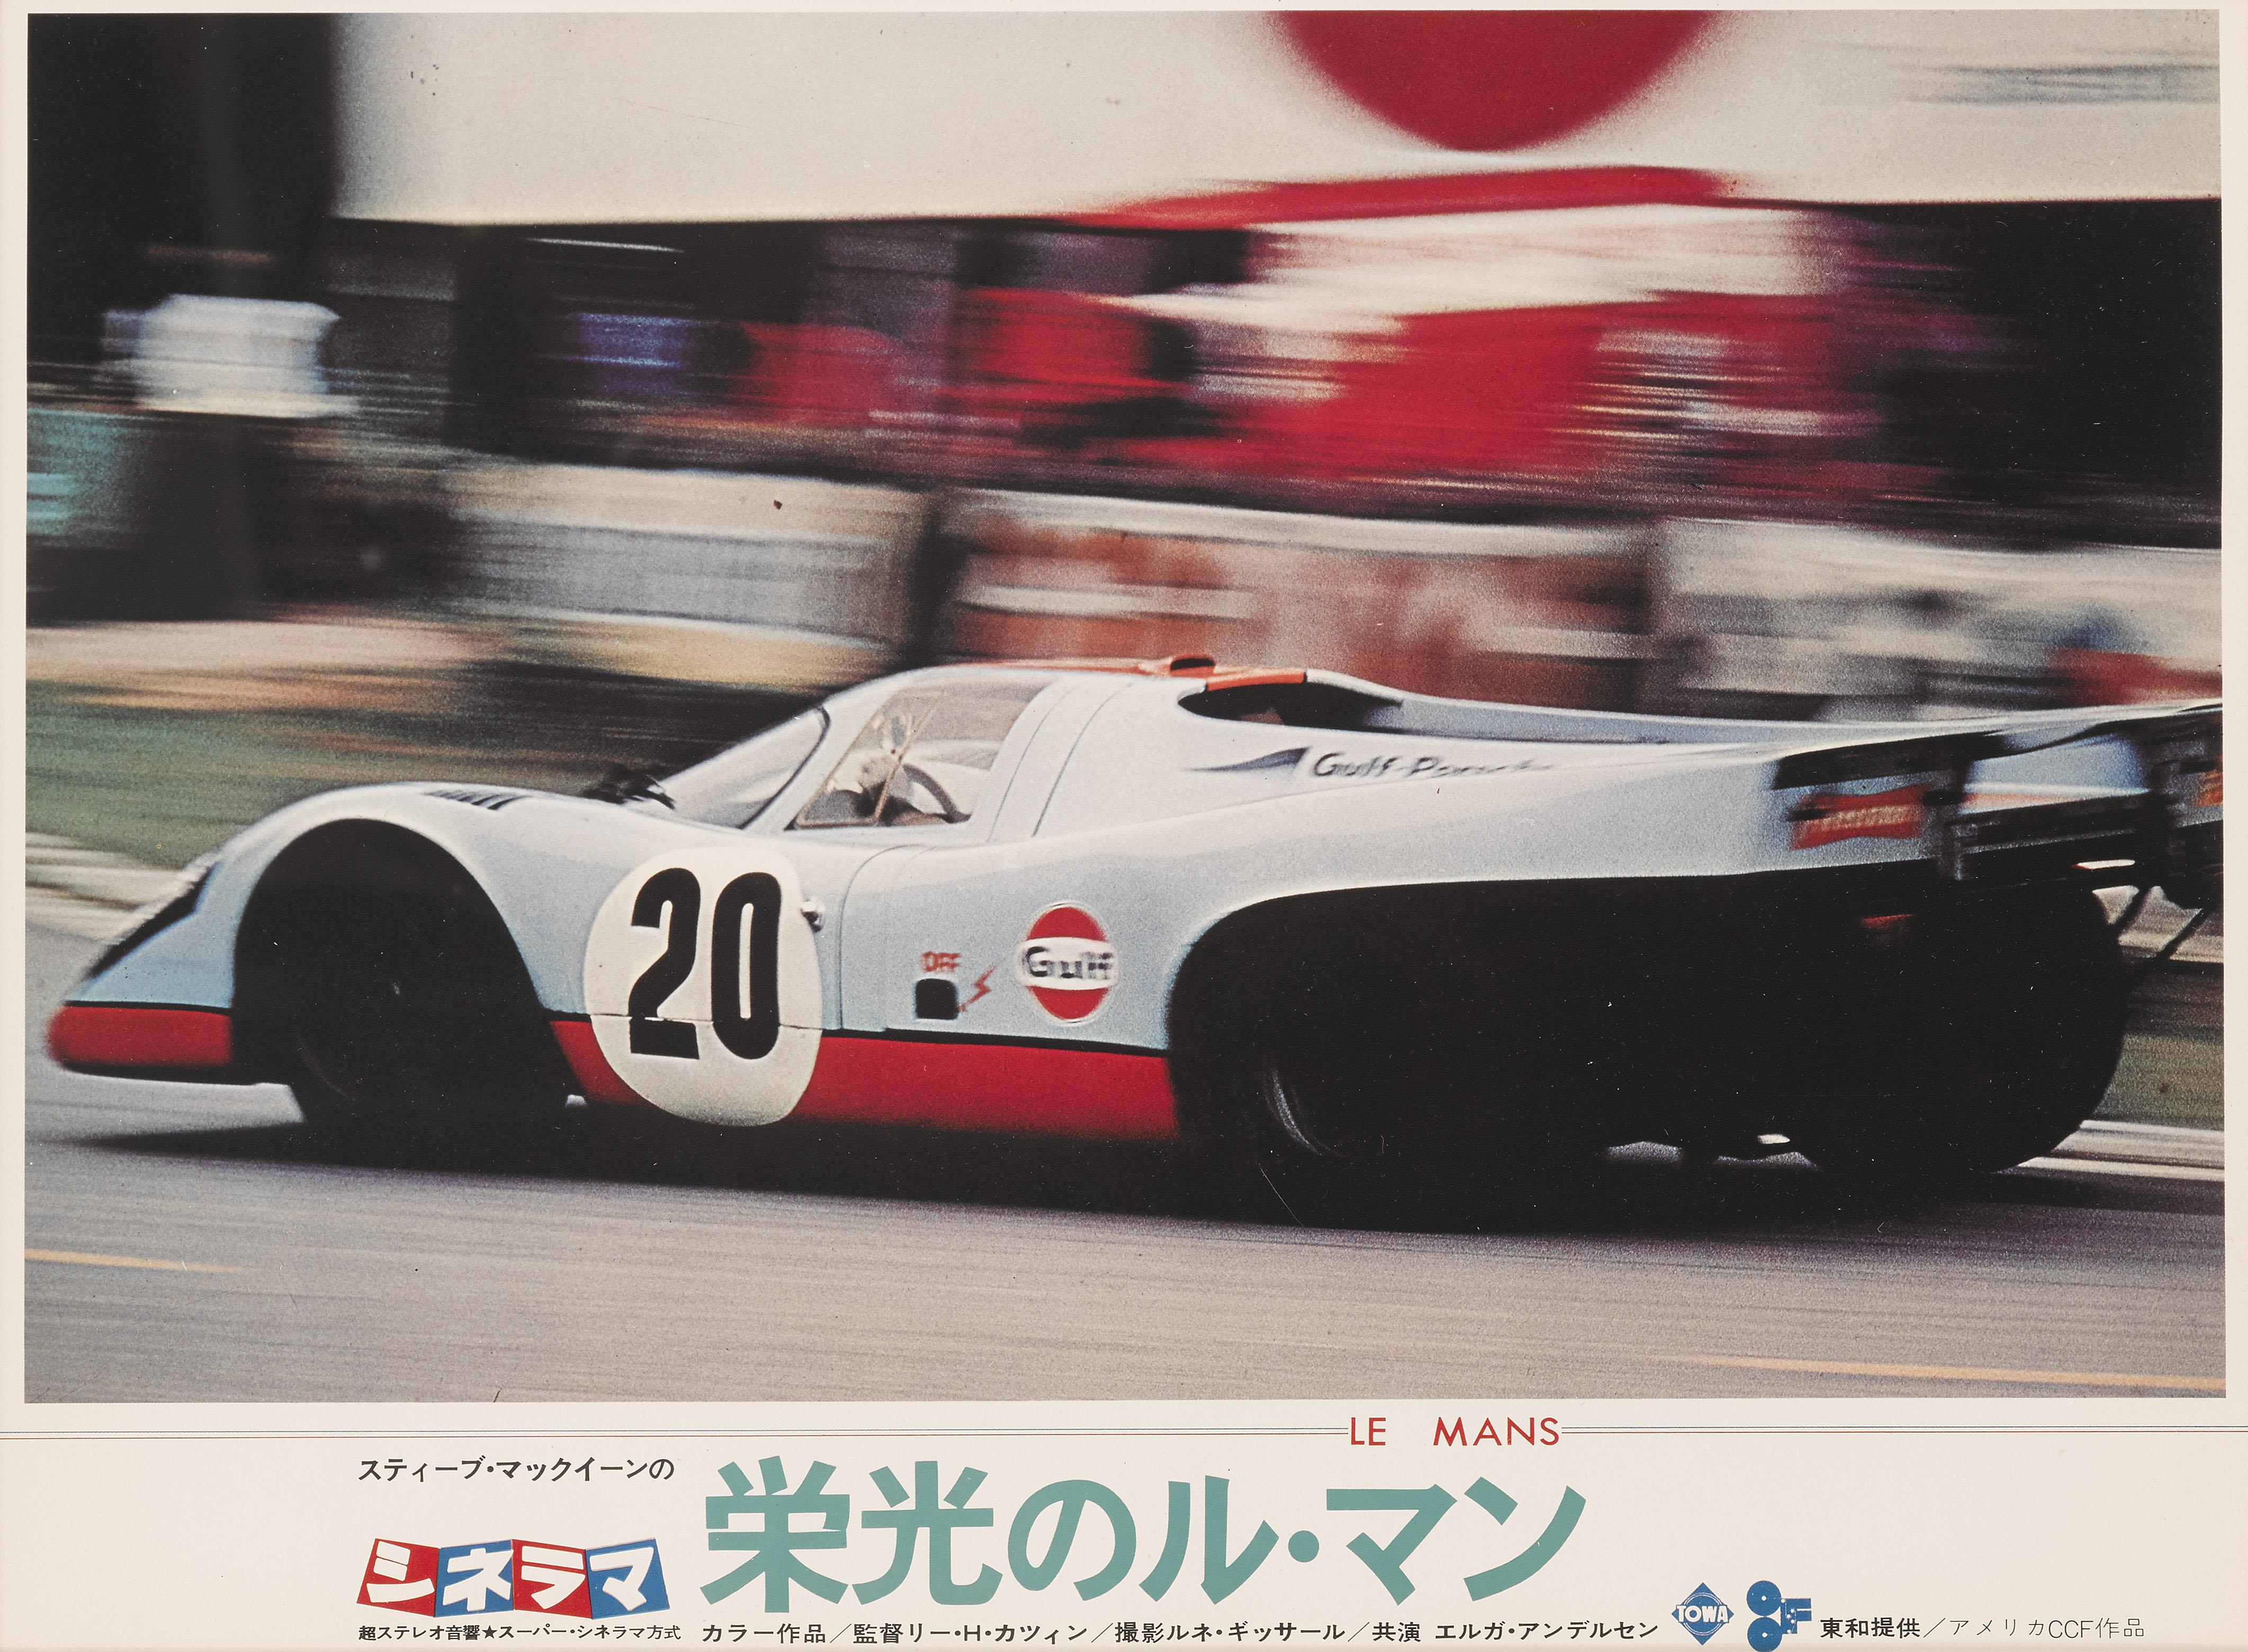 Original Japanese Lobby card for Steve McQueen's 1971 film Le Mans. 
This card shows the Porsche 908 K Flunder Spyder which was his personal car.
This film, directed by Lee H. Katzin, portrays the famous Le Mans 24 Hour endurance motor race, and